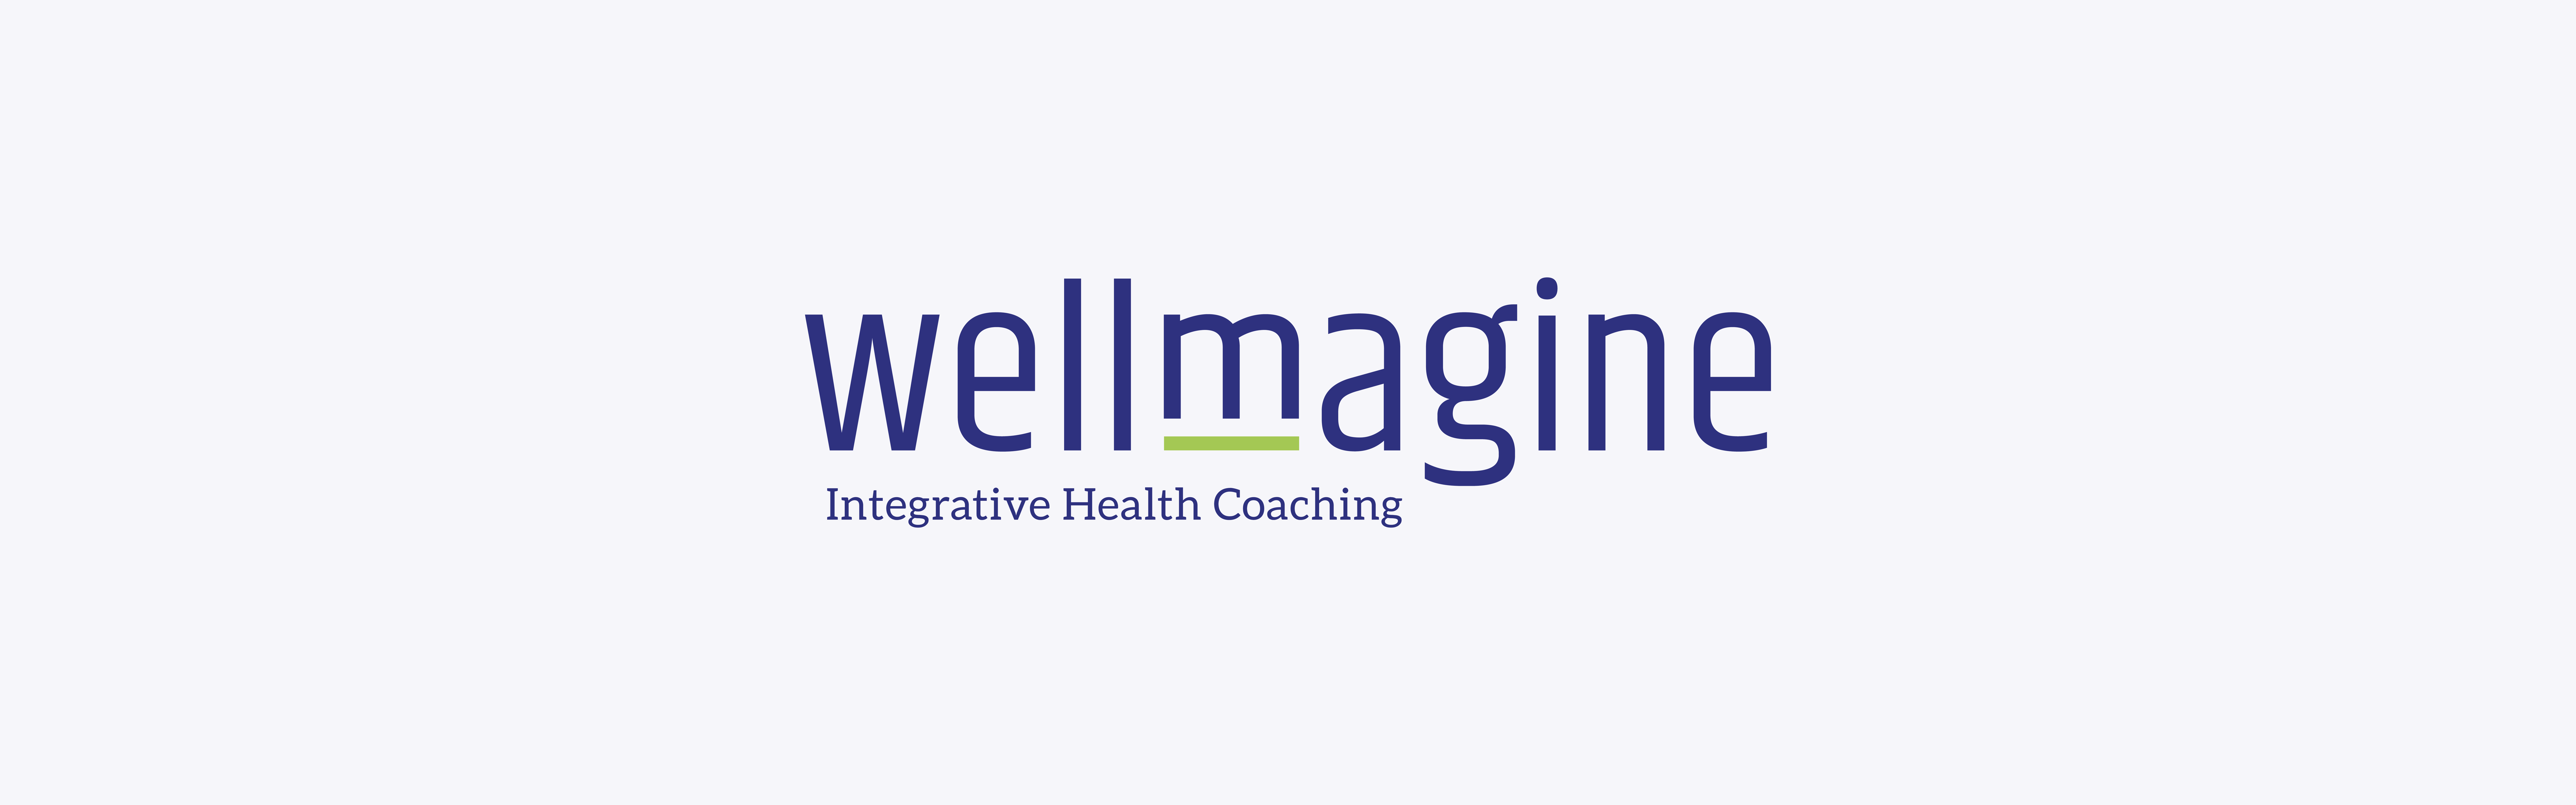 The image displays a logo with the word "Wellmagine" in lowercase, stylized letters, with a green leaf integrated into the letter 'm'. Below this, in smaller font, are the